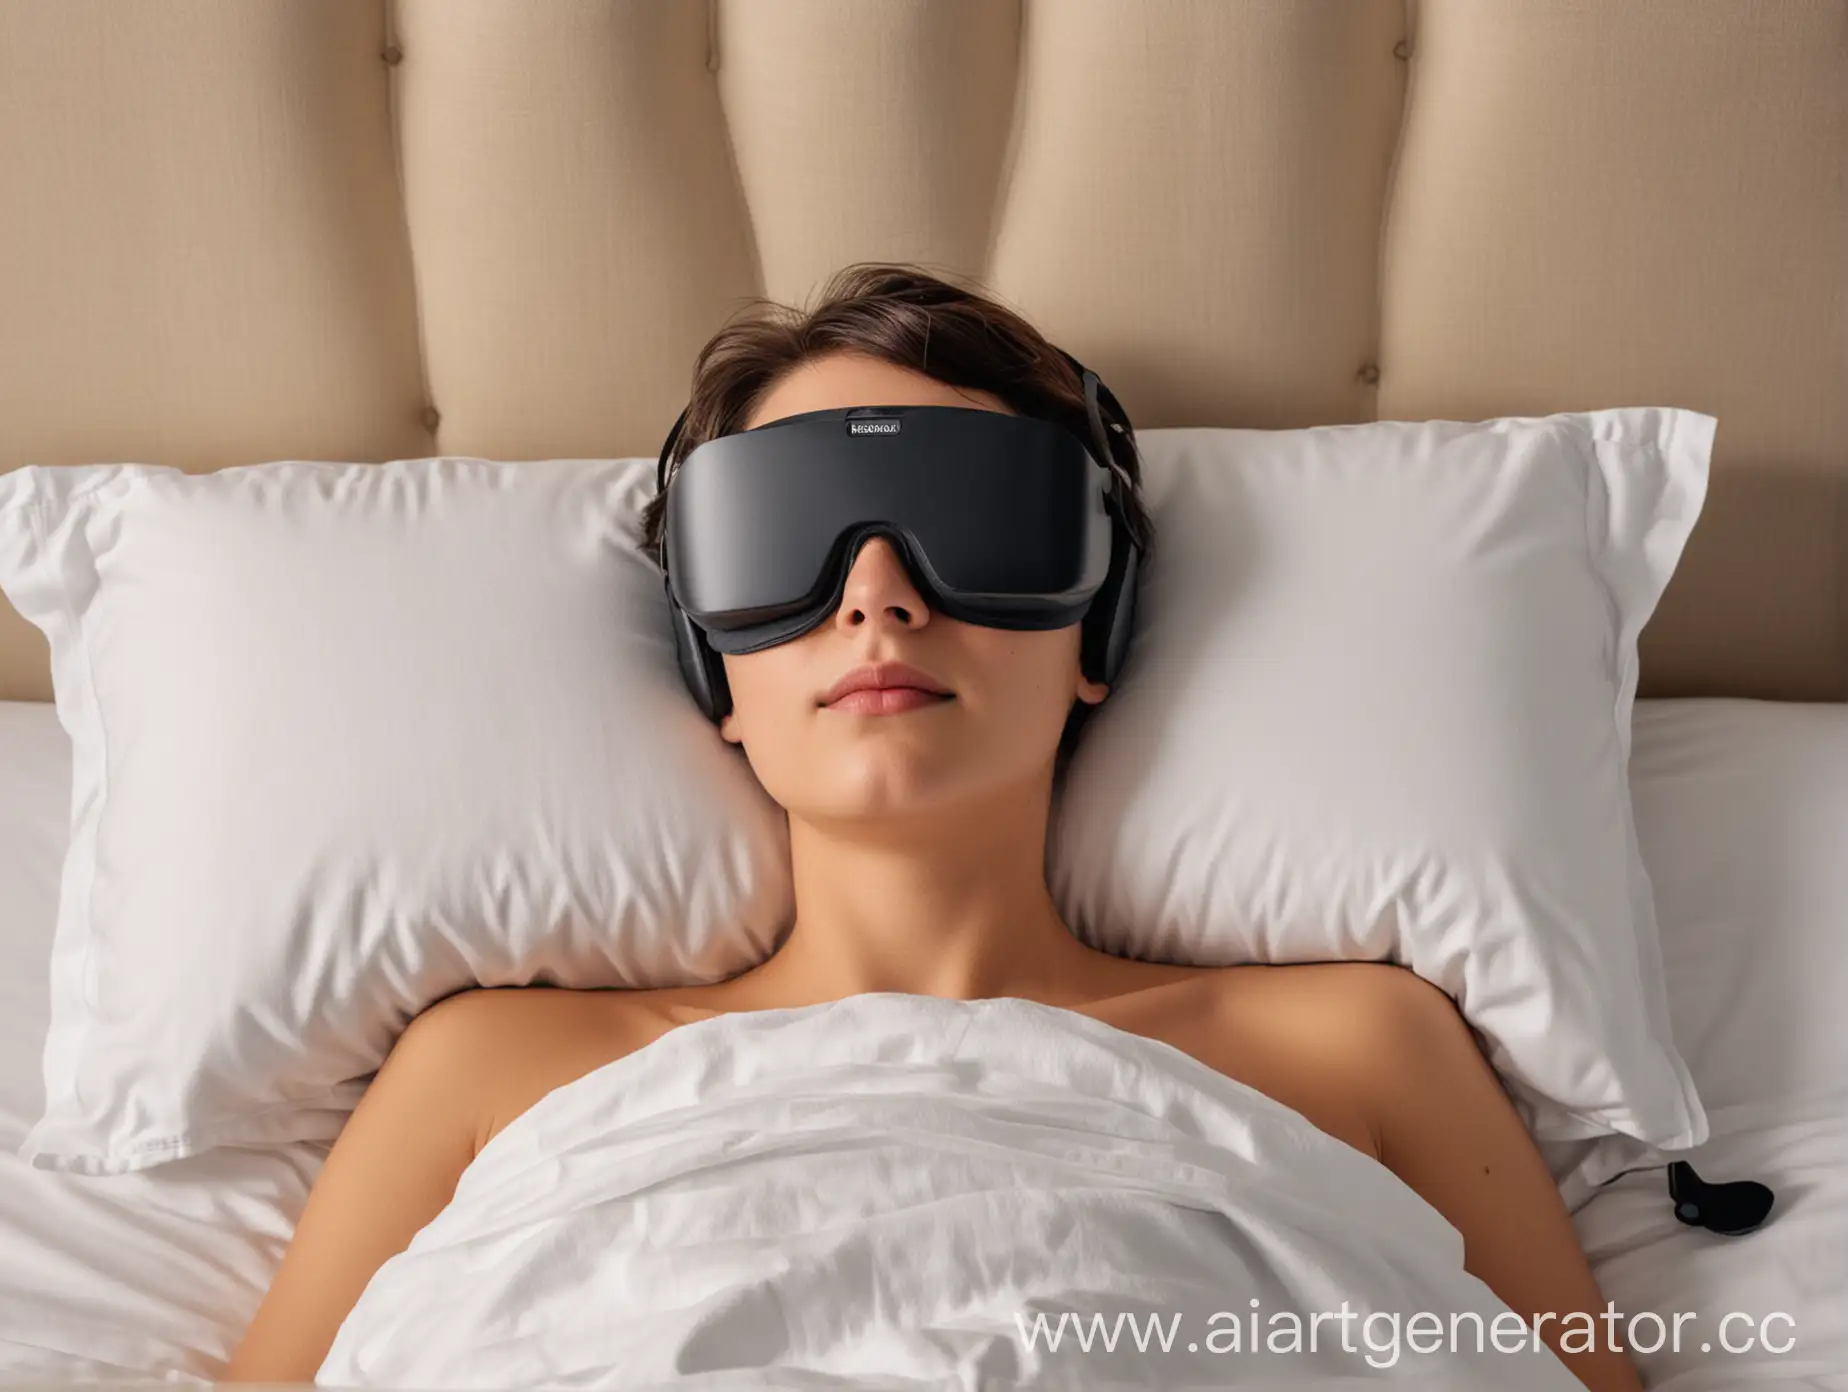 Relaxing-Bedtime-with-VR-Sleep-Mask-and-Speakers